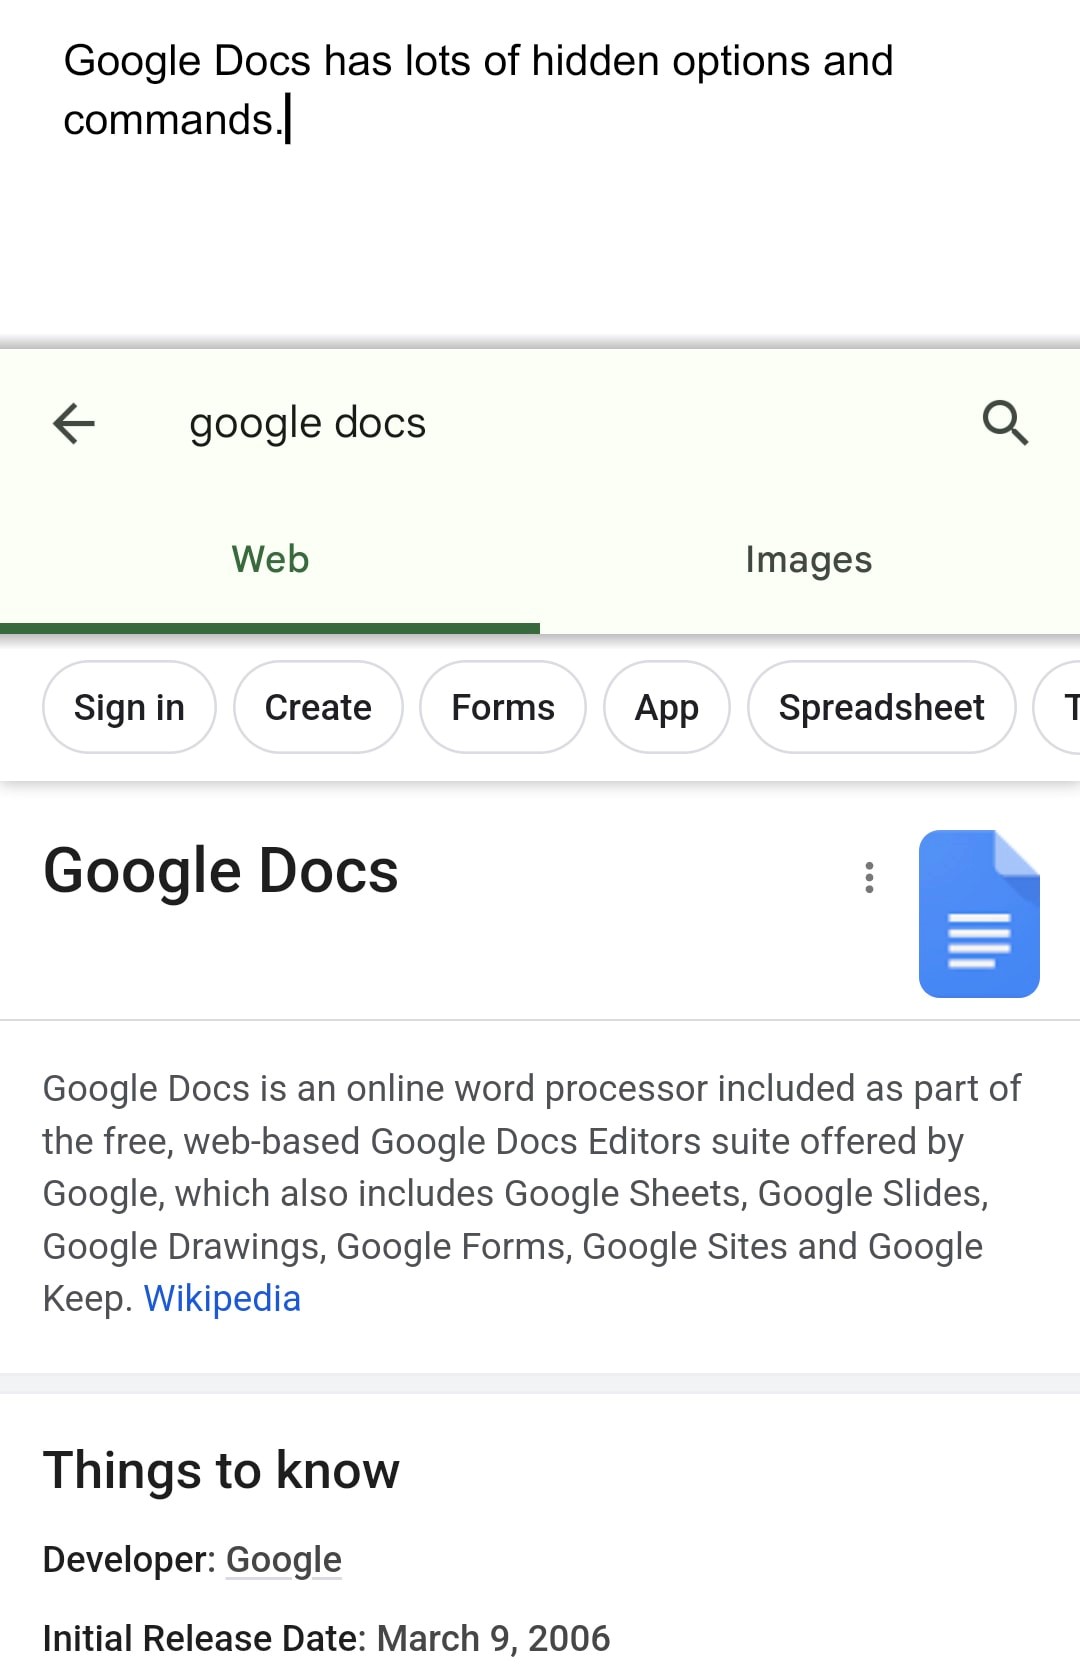 77 incredibly useful tips for Google apps: Gmail, Docs, Sheets, and beyond